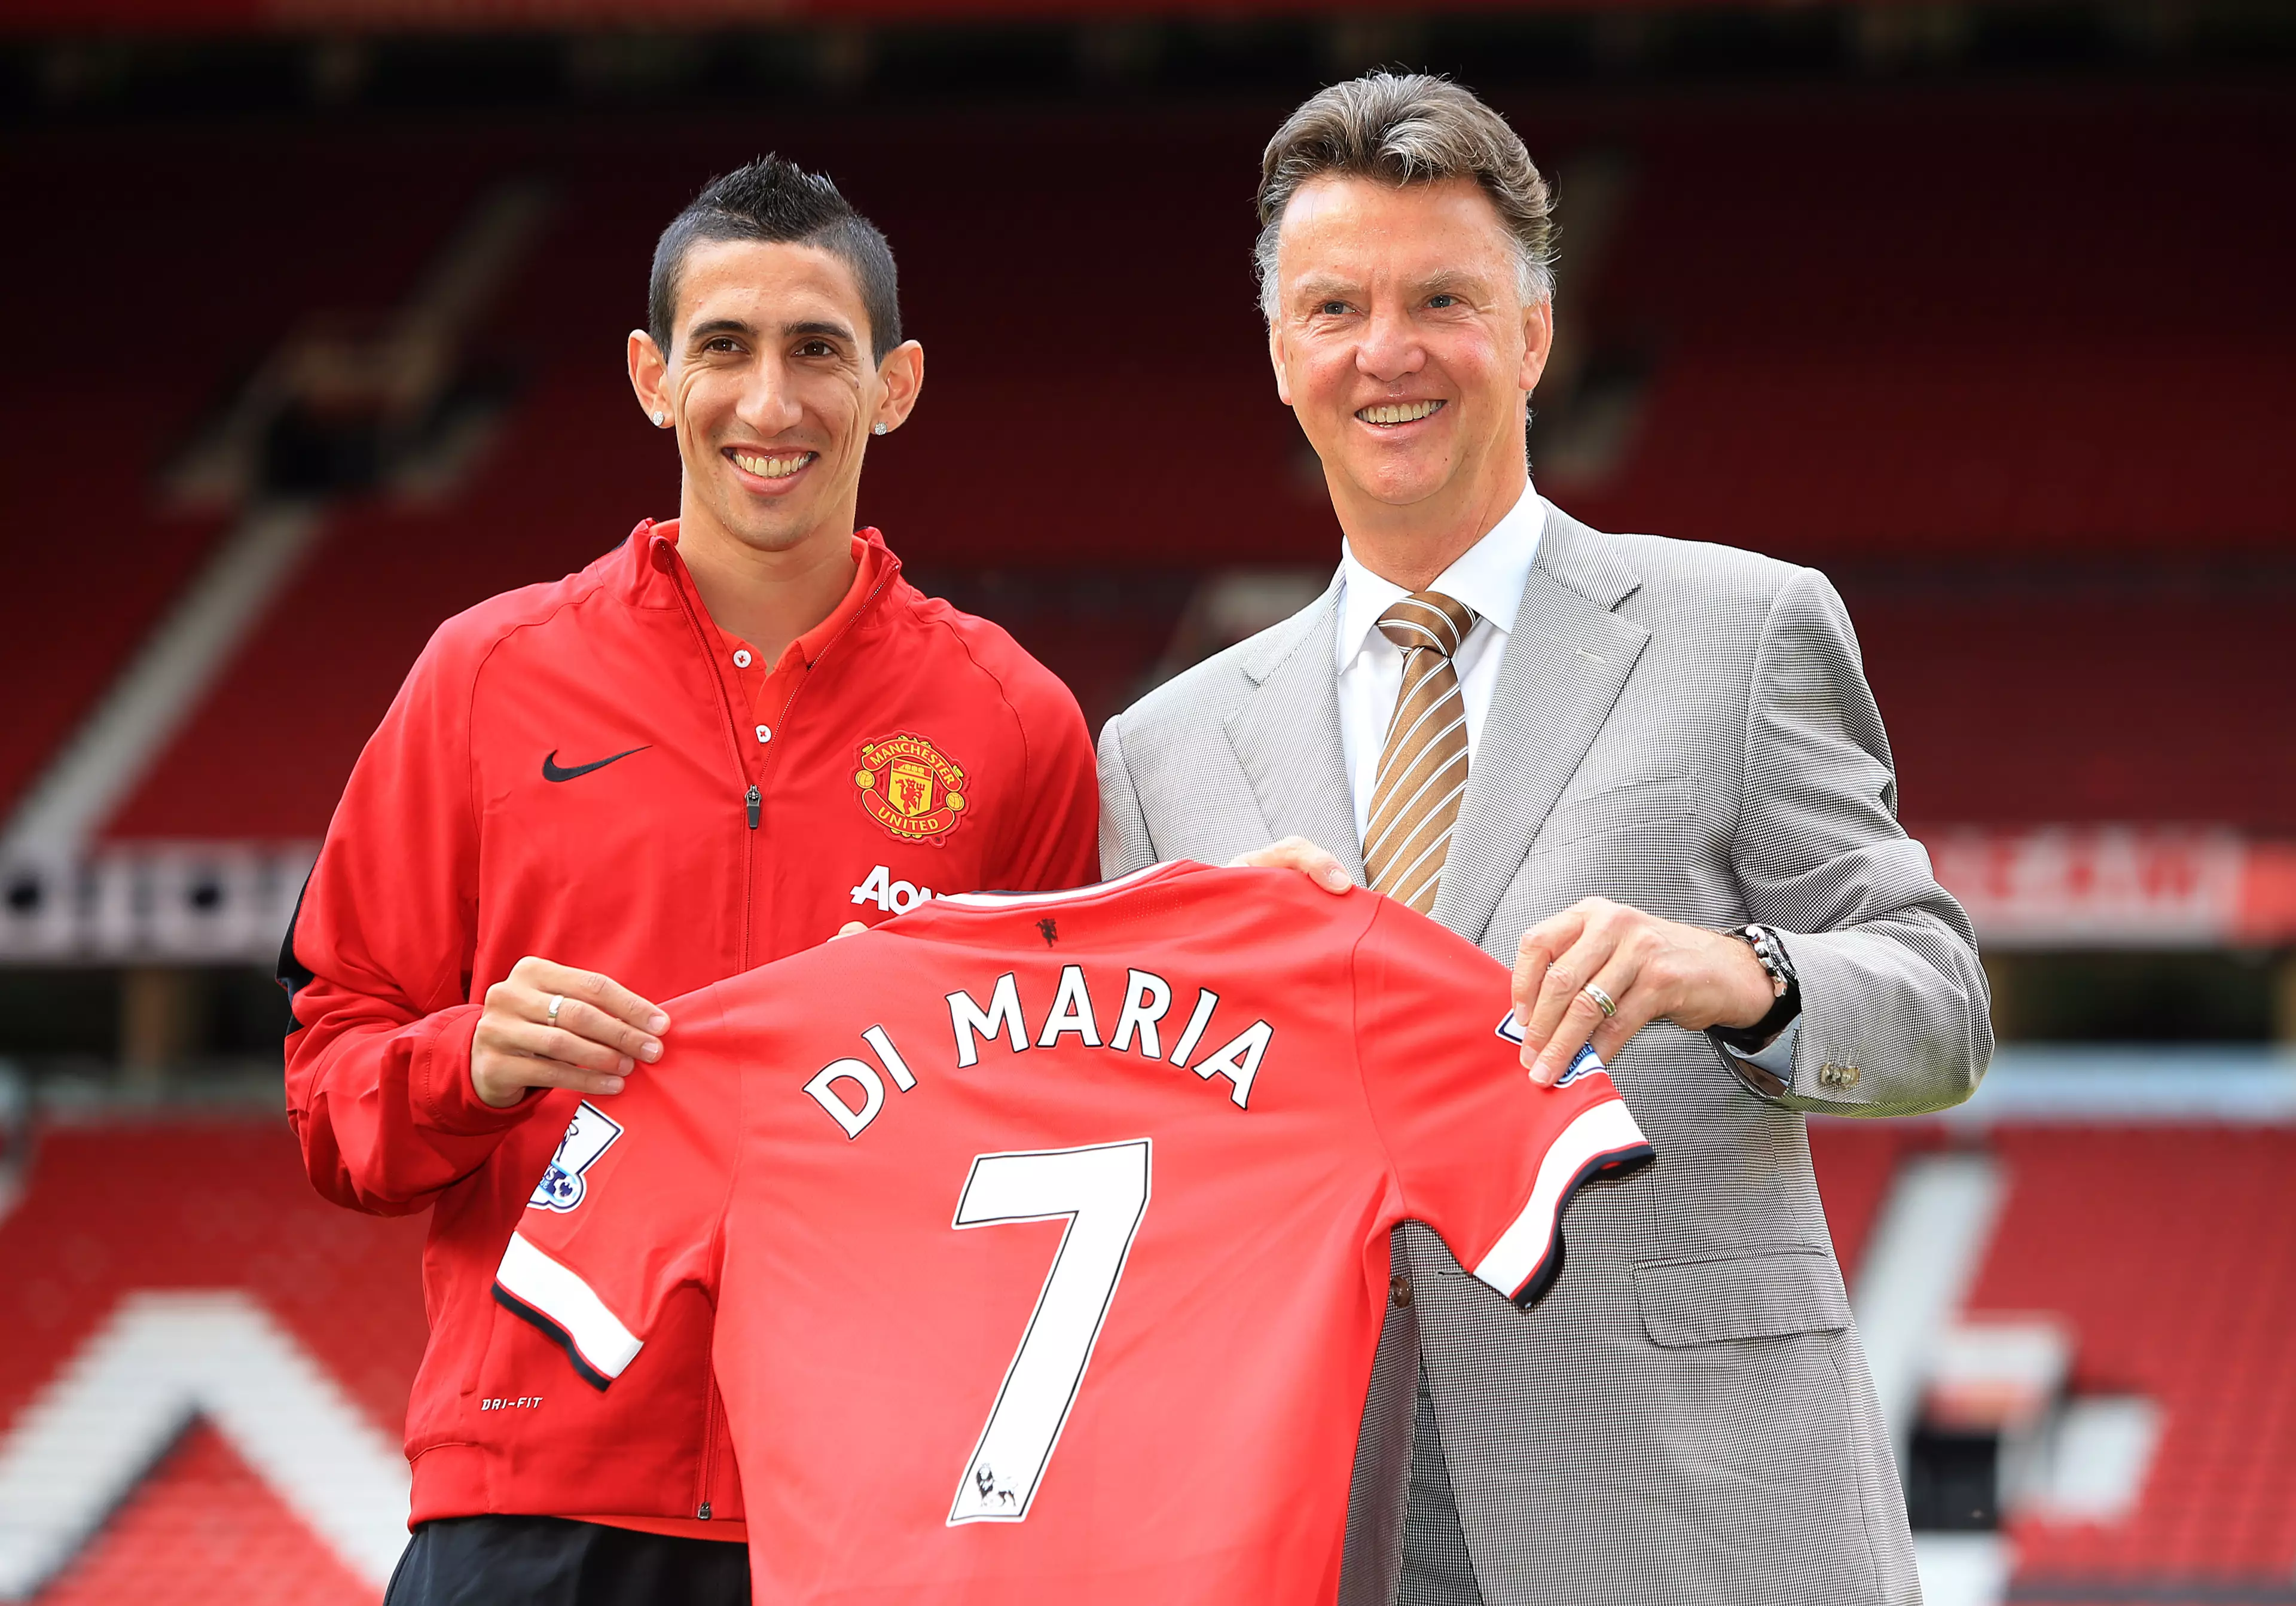 Life started with all smiles for Di Maria but they soon disappeared. Image: PA Images